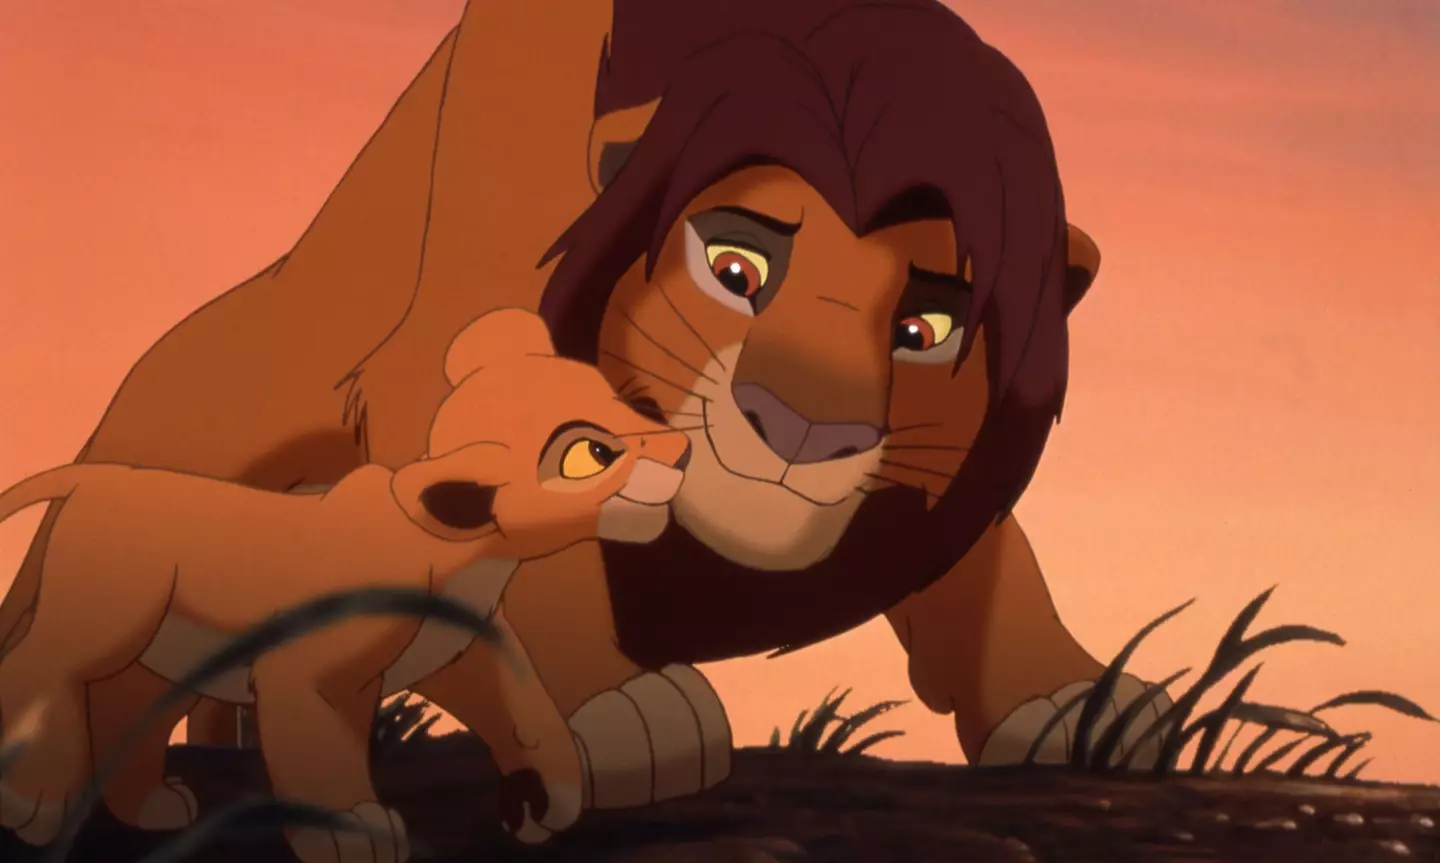 The Lion King is one of Disney's most popular animated films.